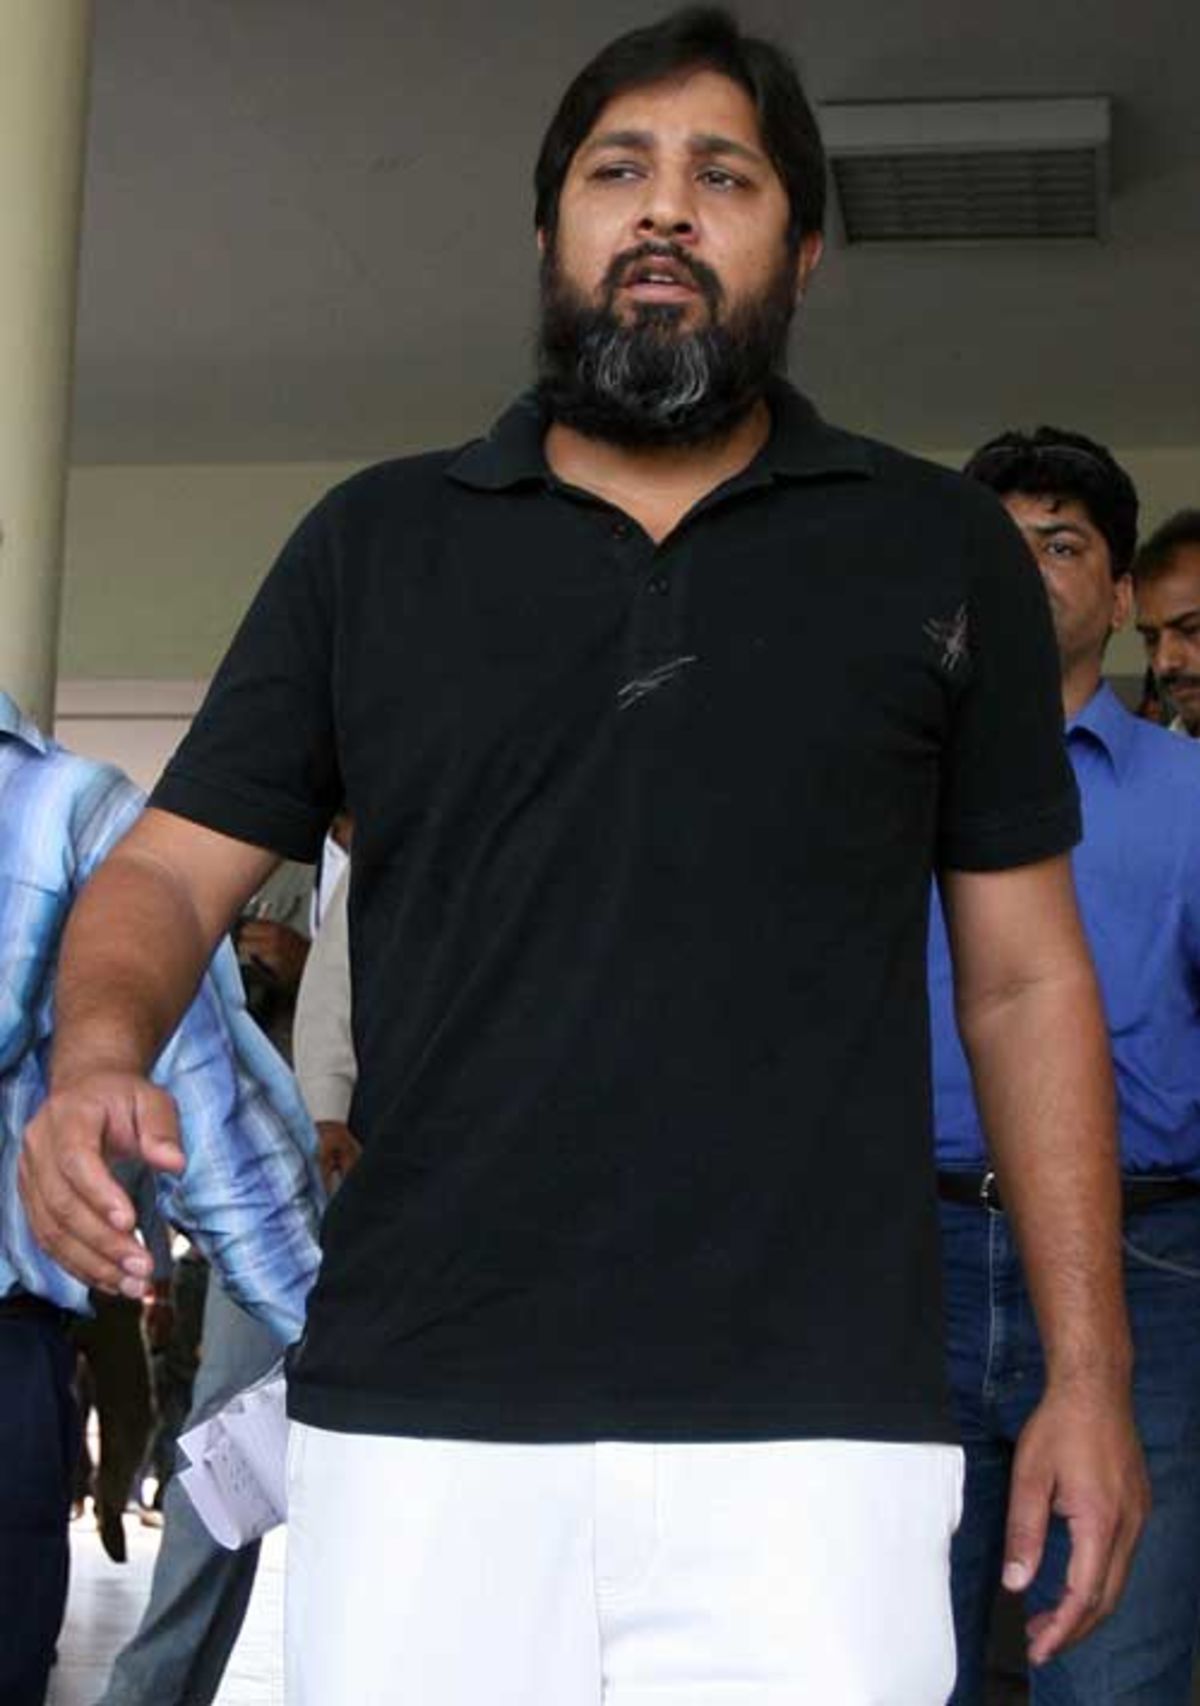 Inzamam-ul-Haq leaves a press conference in Lahore after talking about the 'most traumatic' period of his life, Lahore, March 31, 2007